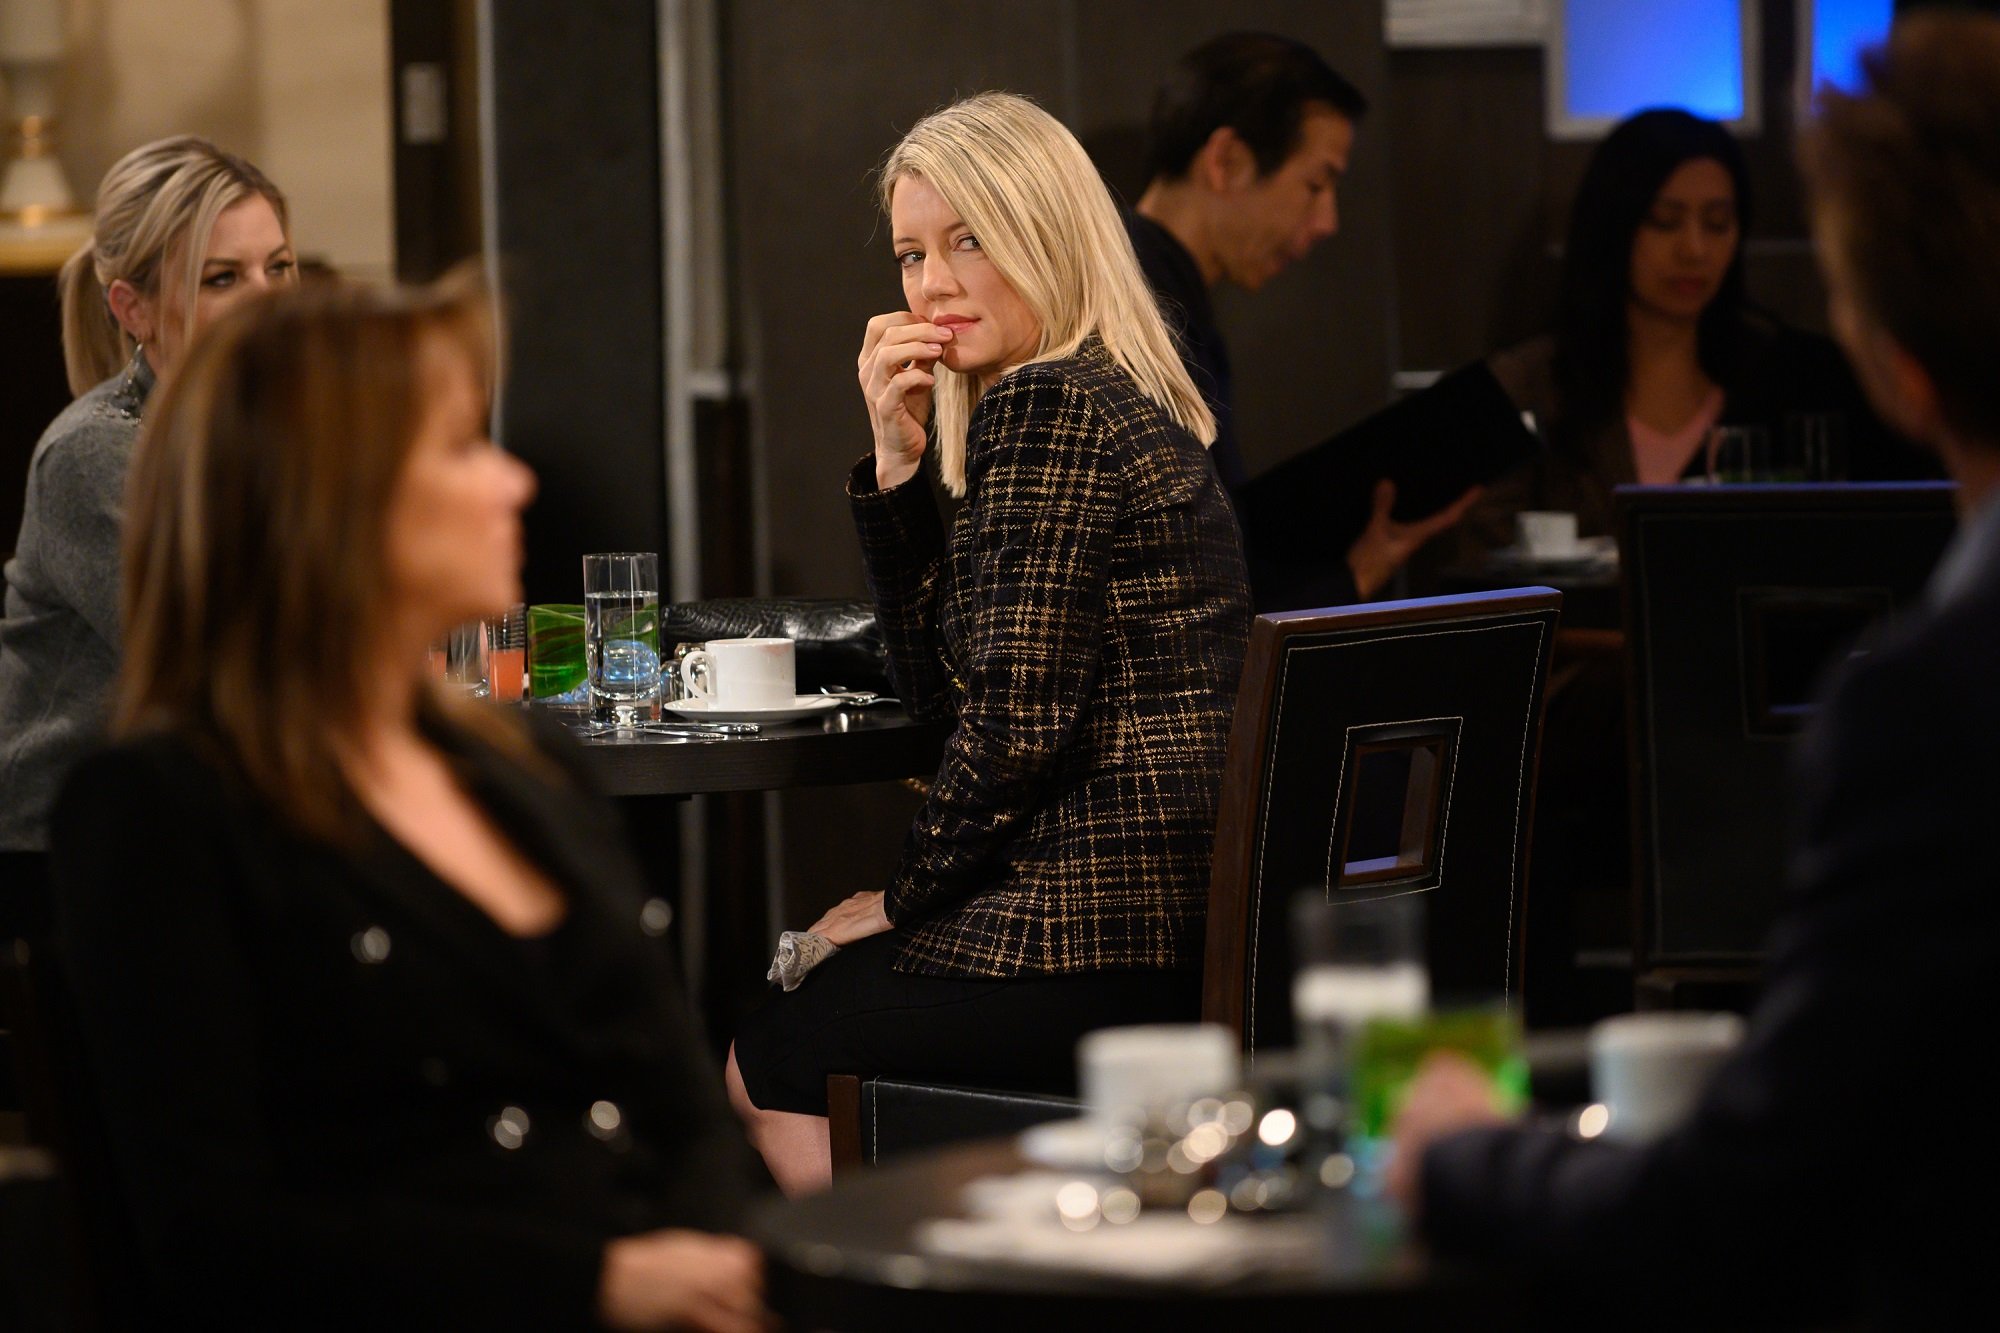 General Hospital spoilers may have Nina - pictured here in a tweed sweater in a restaurant - revealing the truth about Sonny